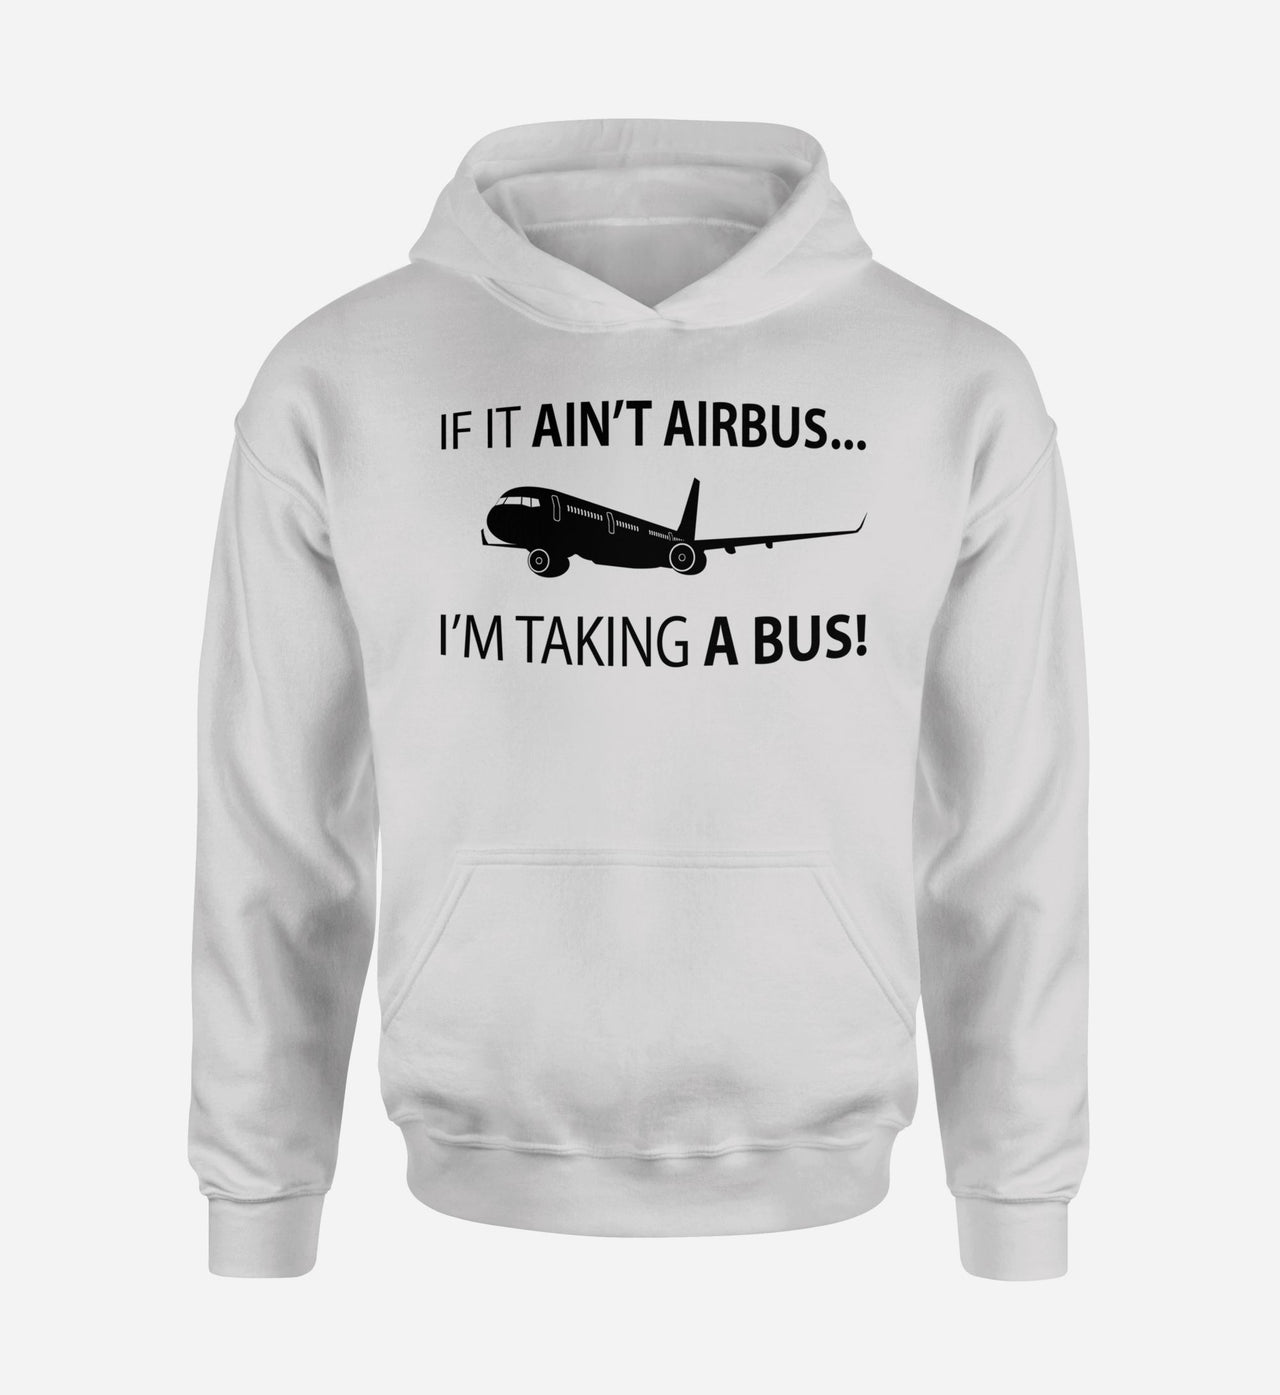 If It Ain't Airbus I'm Taking A Bus Designed Hoodies